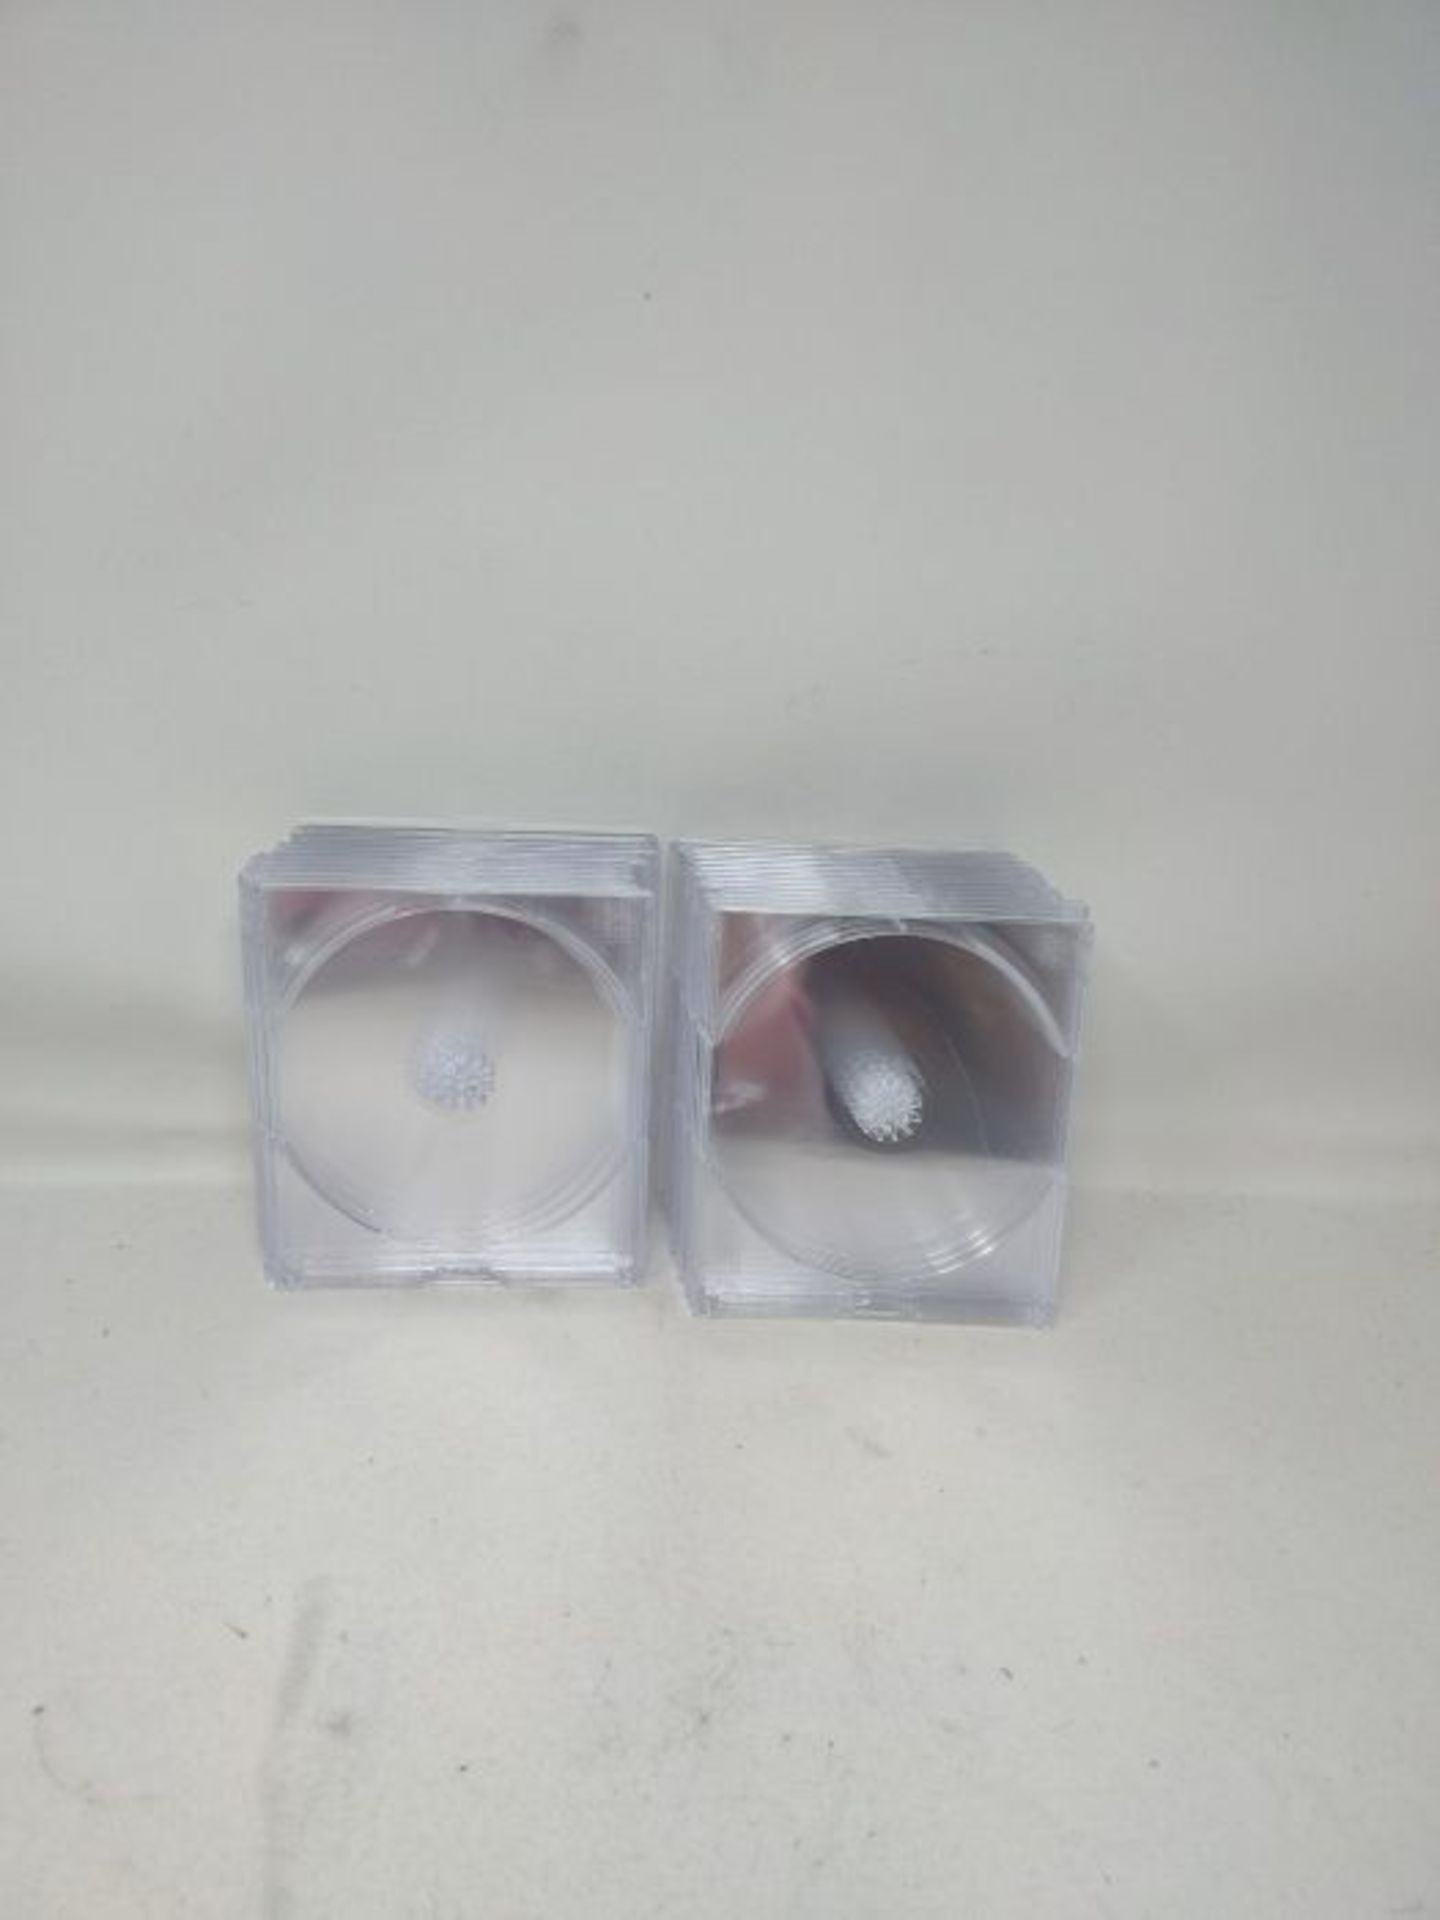 Hama 51168 Slim CD Double Cases Pack of 25 - Transparent - Image 2 of 2